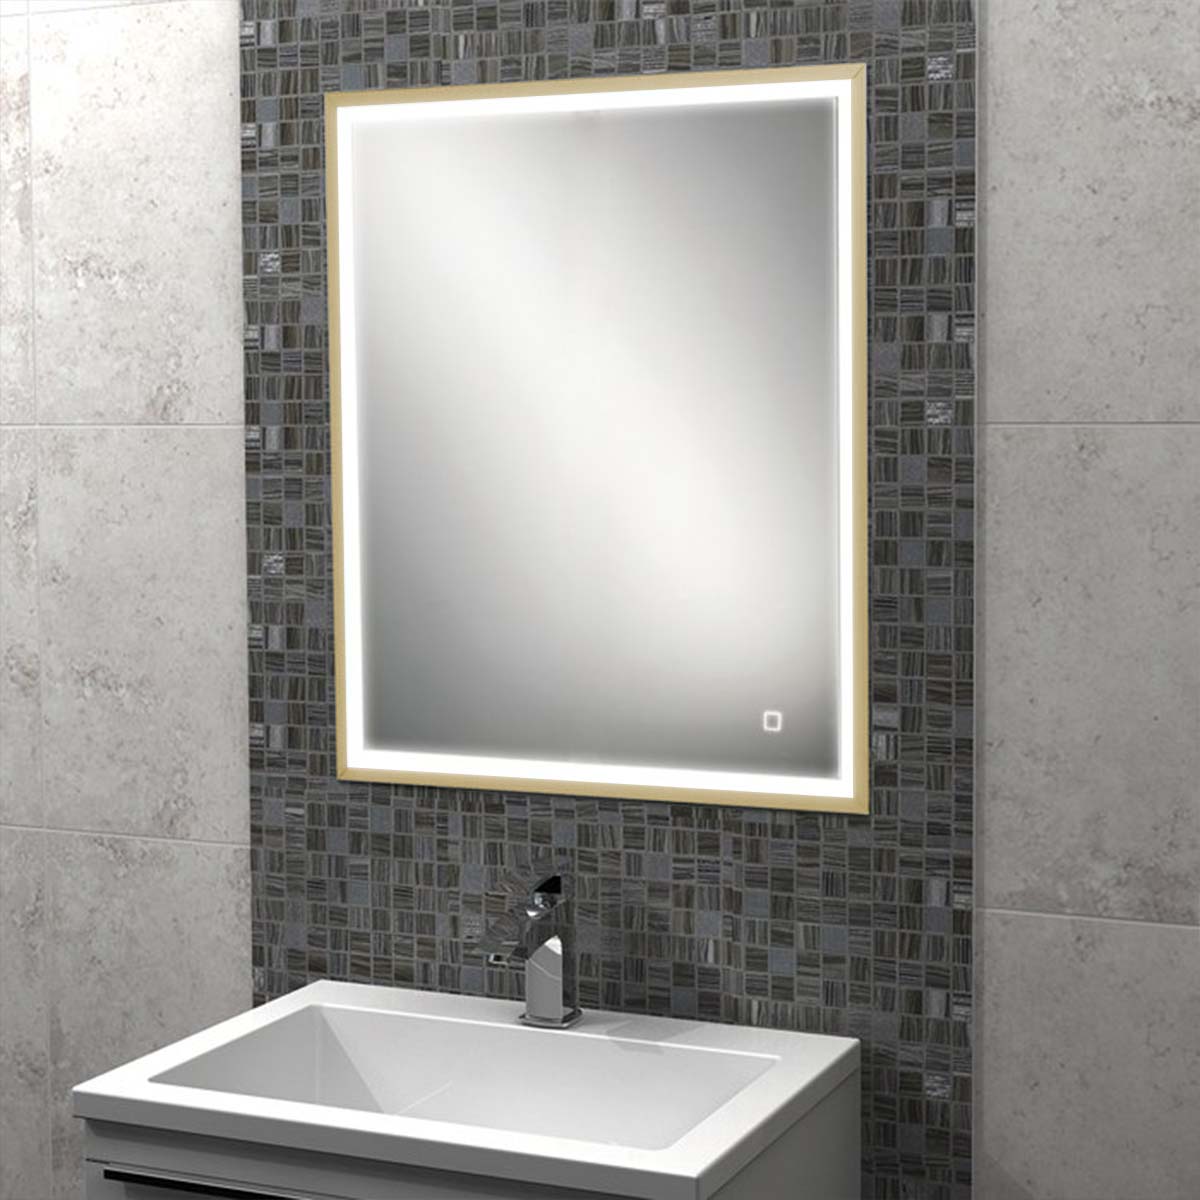 HiB Vanquish 50 Recessed LED Mirror Cabinet With Charging Socket